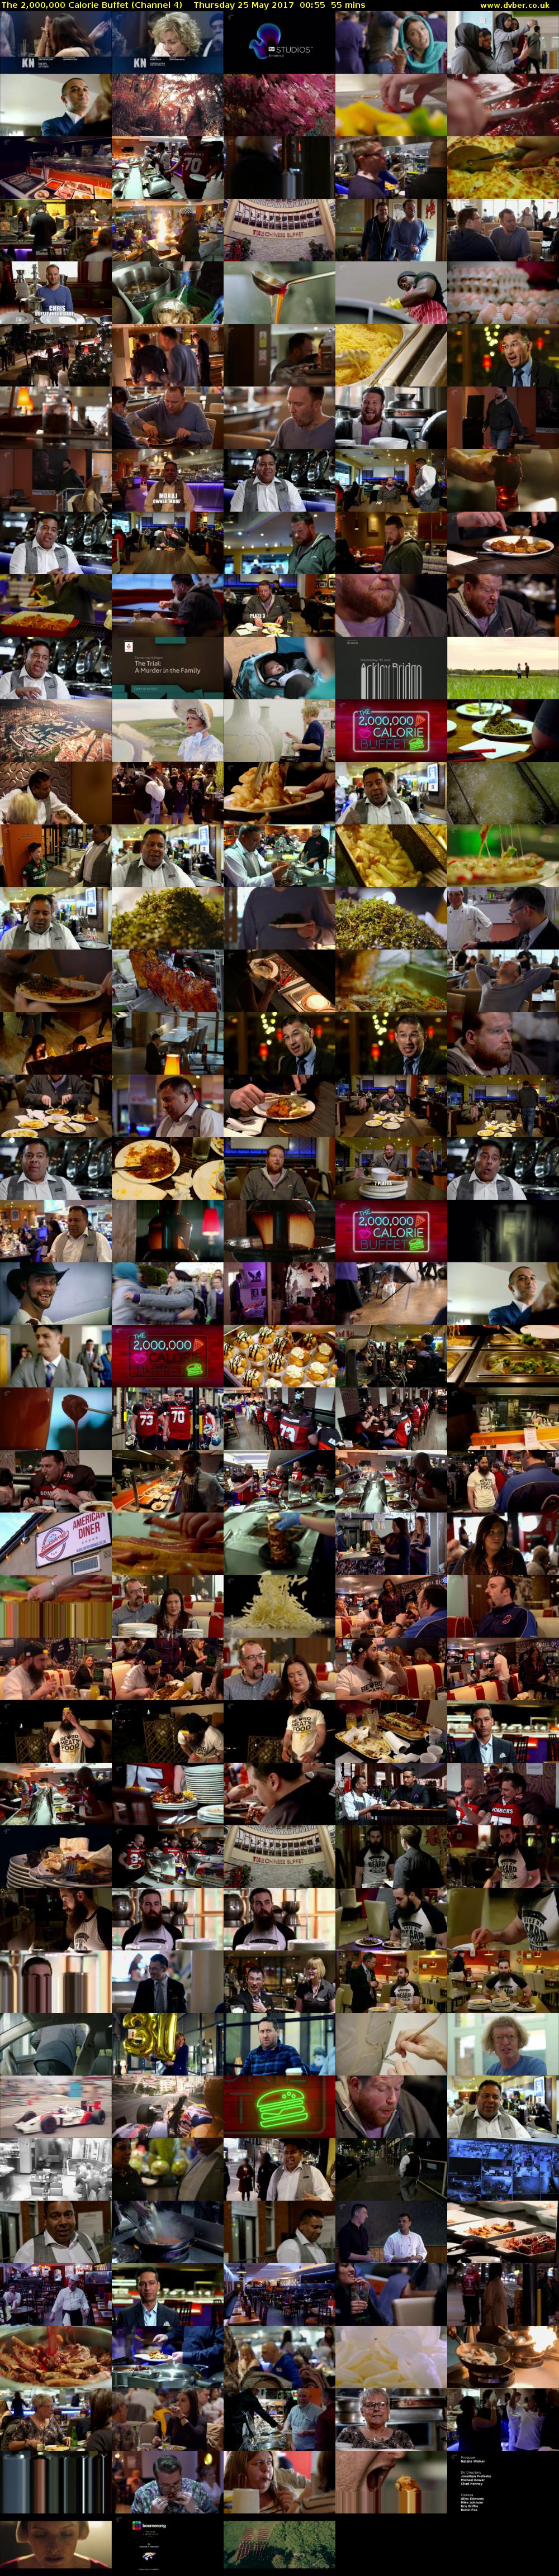 The 2,000,000 Calorie Buffet (Channel 4) Thursday 25 May 2017 00:55 - 01:50